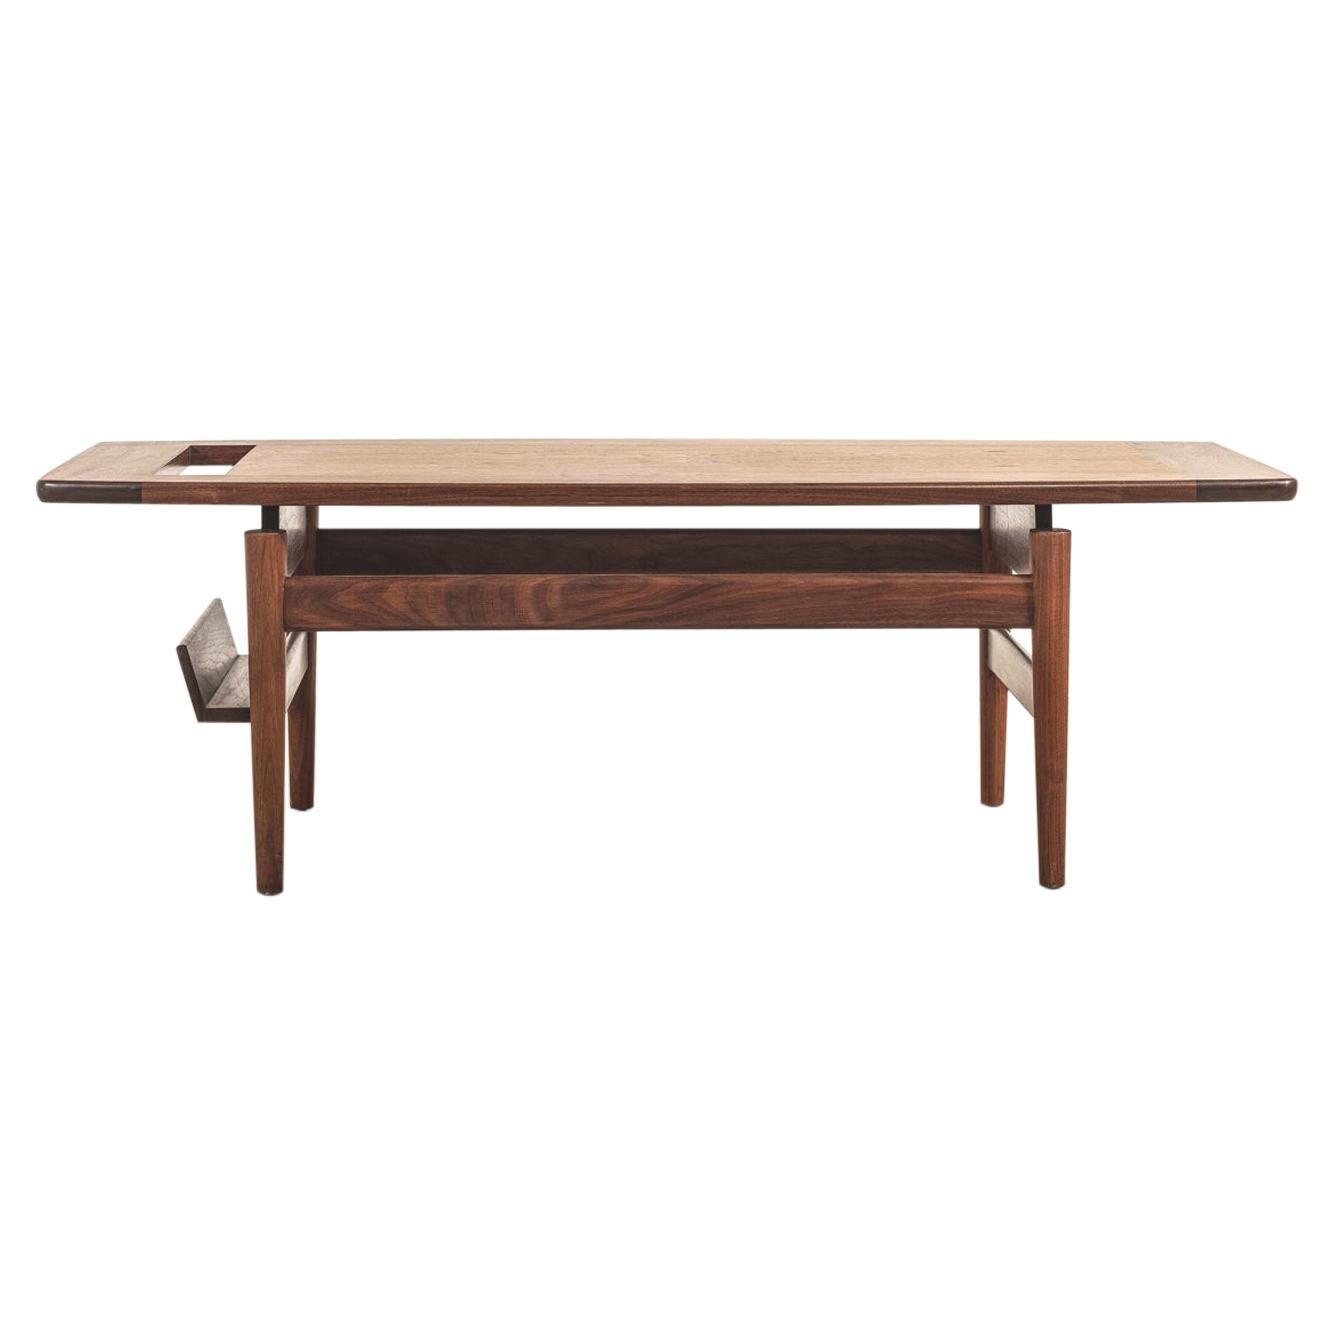 T390 Low Table with Magazine Rack in Walnut by Jens Risom